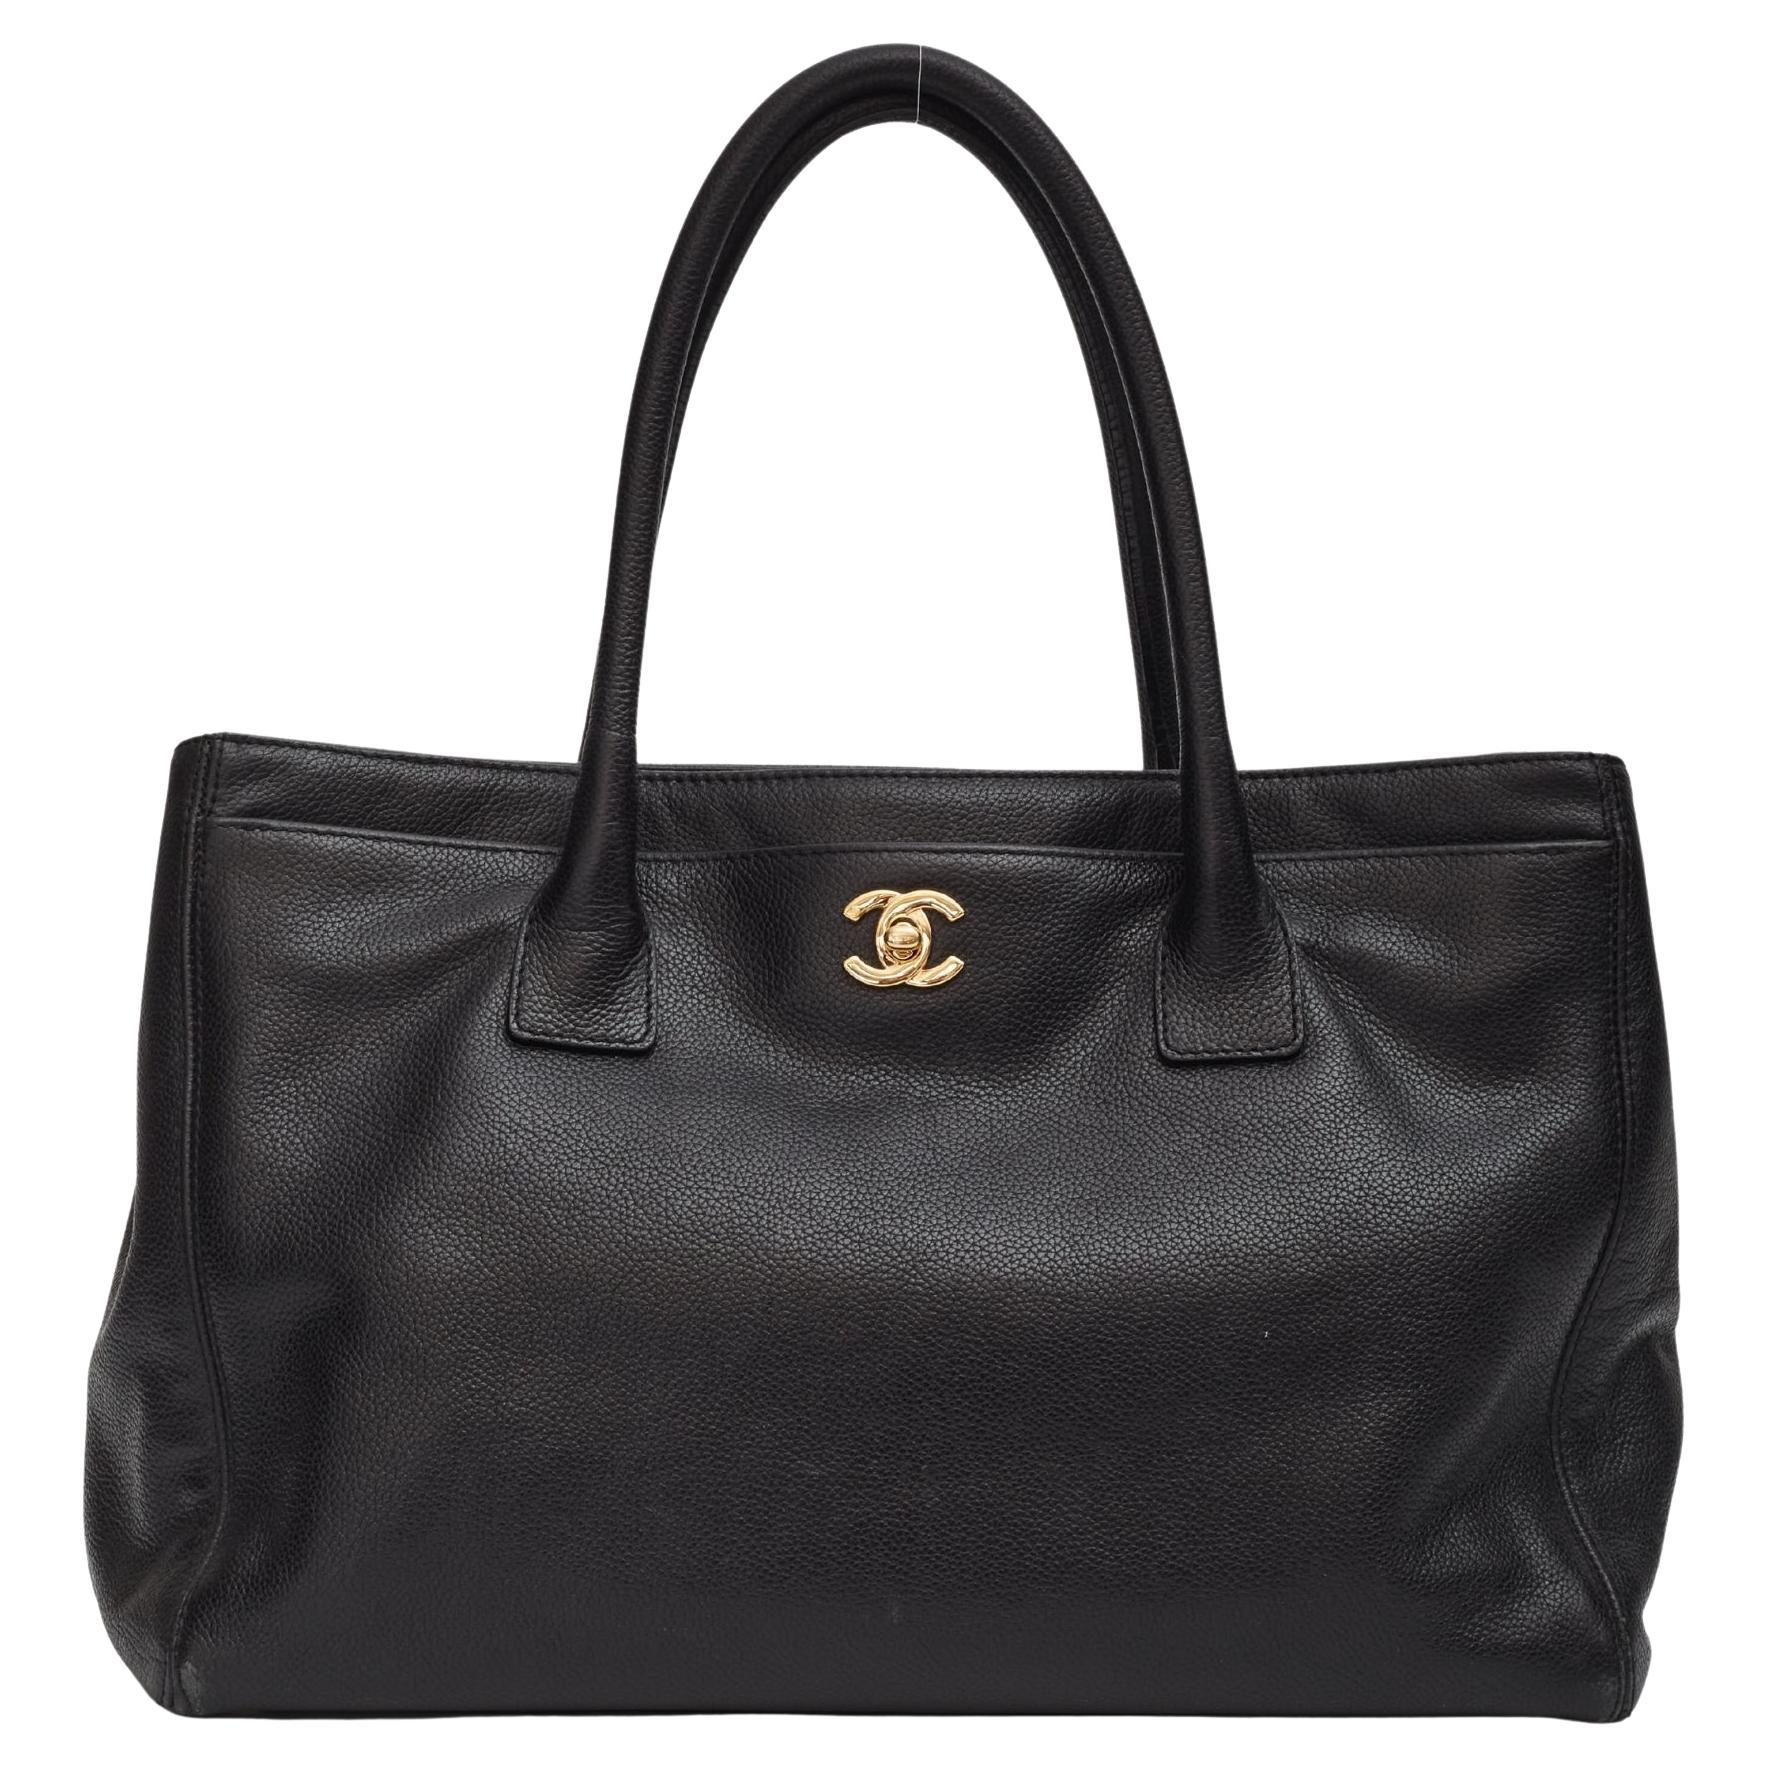 Chanel Black Caviar Leather Cerf Executive Tote Bag 2002